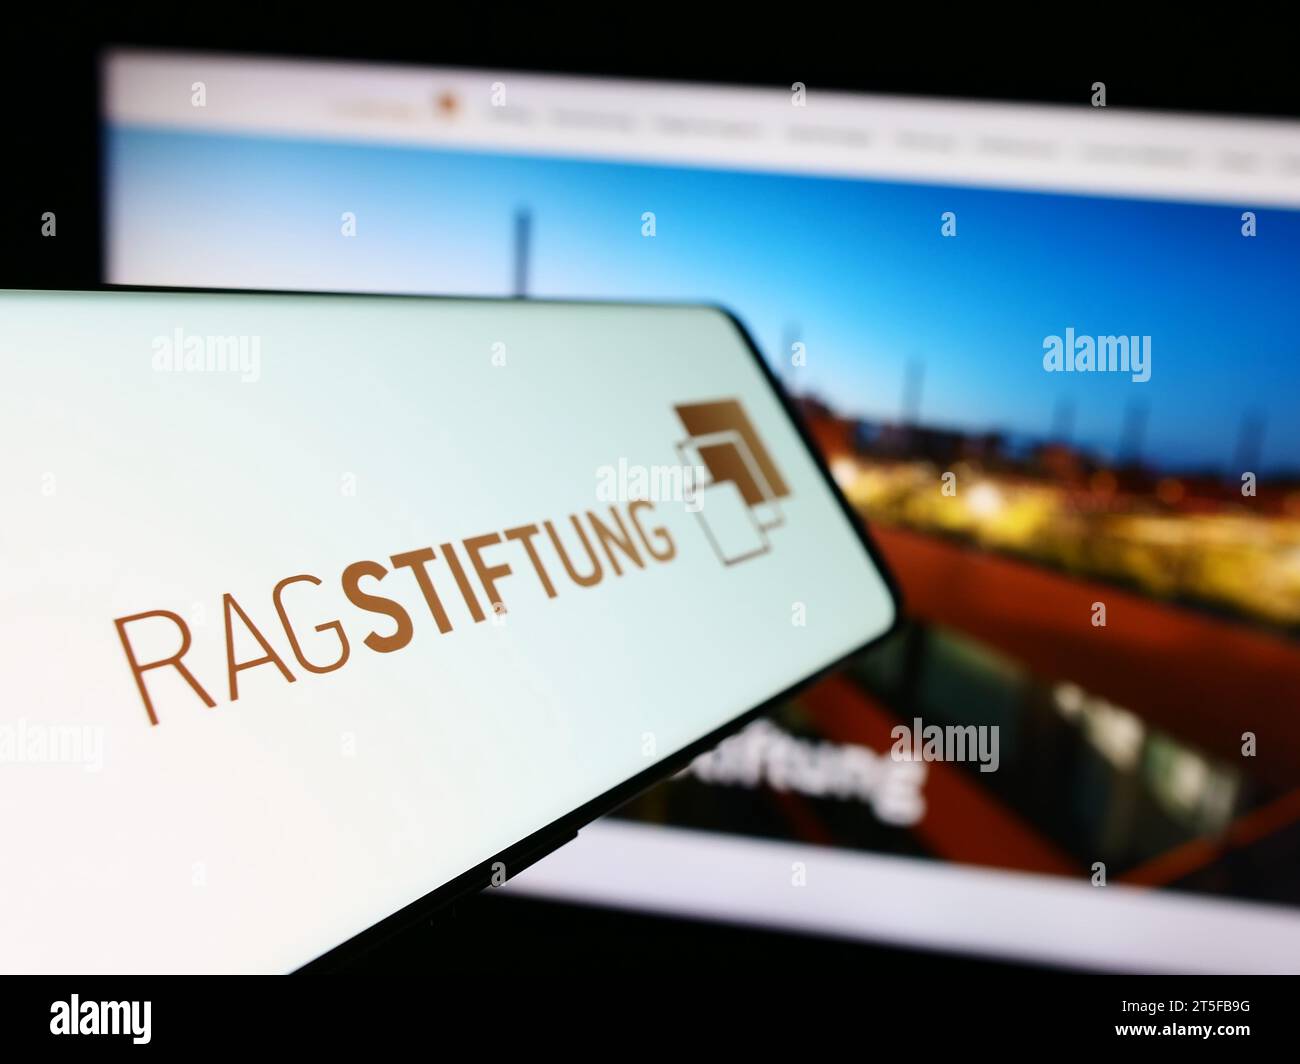 Mobile phone with logo of German foundation RAG-Stiftung in front of website. Focus on center-left of phone display. Stock Photo